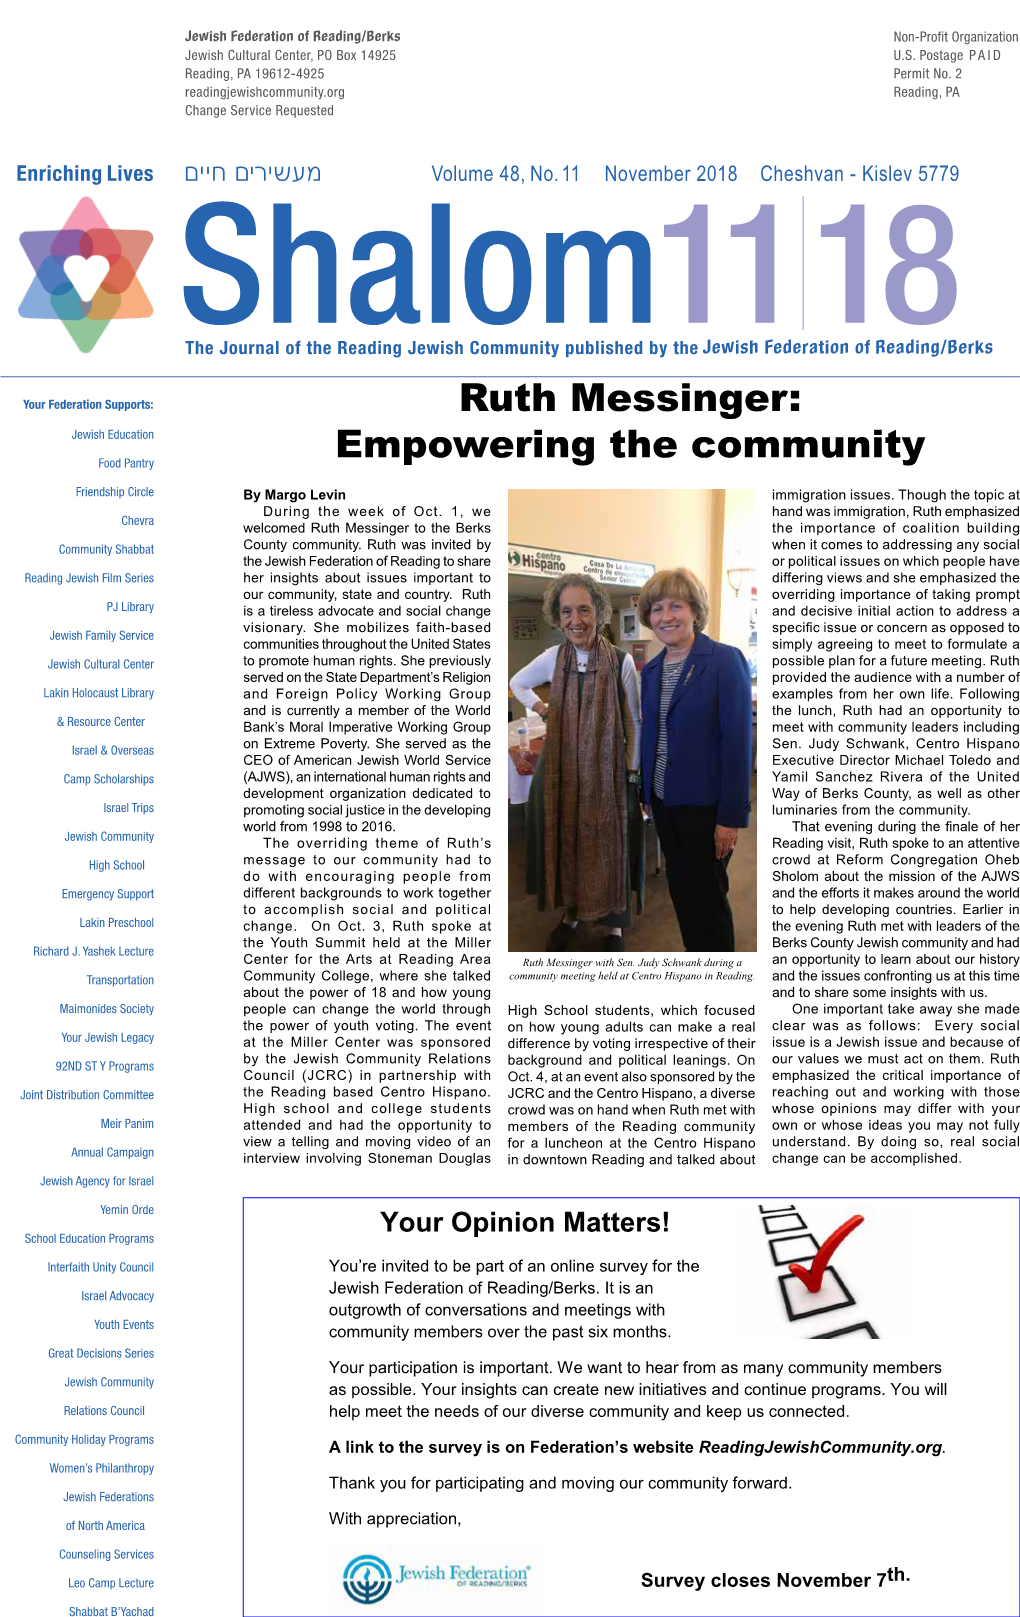 Ruth Messinger: Empowering the Community